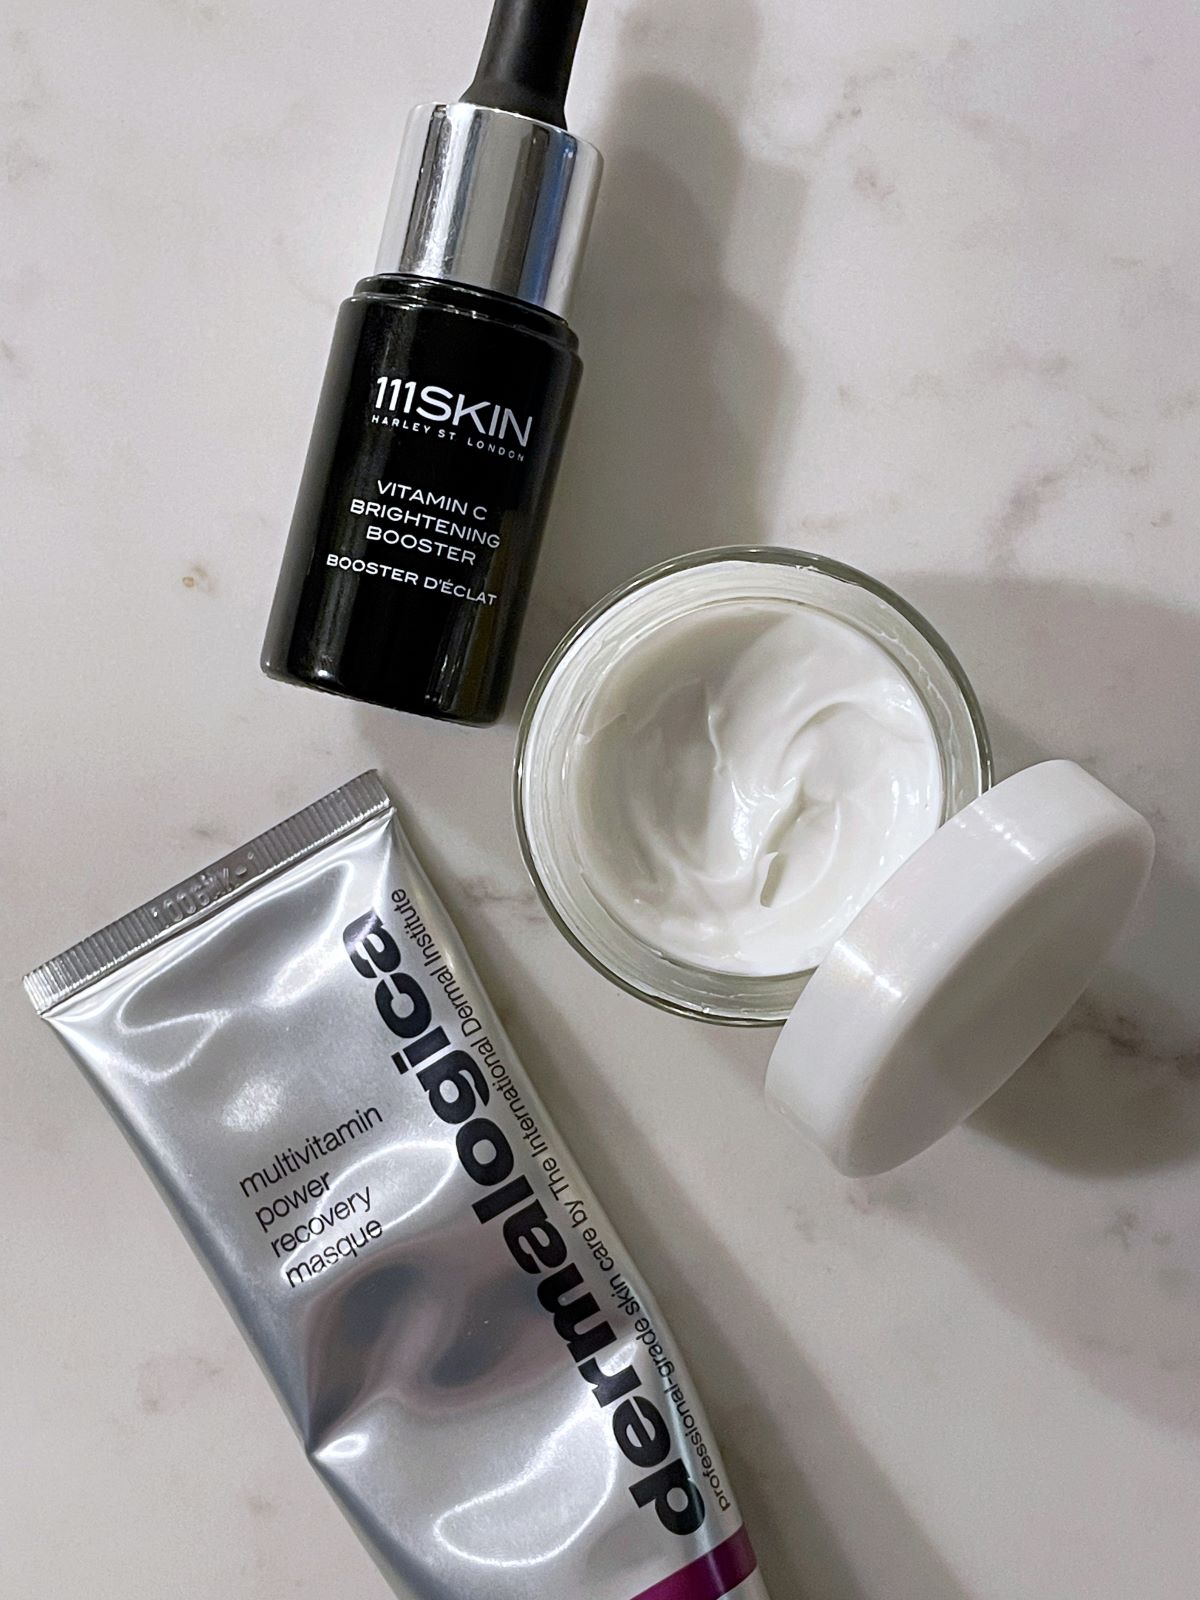 Spring skincare review from Dermalogica, 111 Skin & Burt's Bees - UK beauty blogger